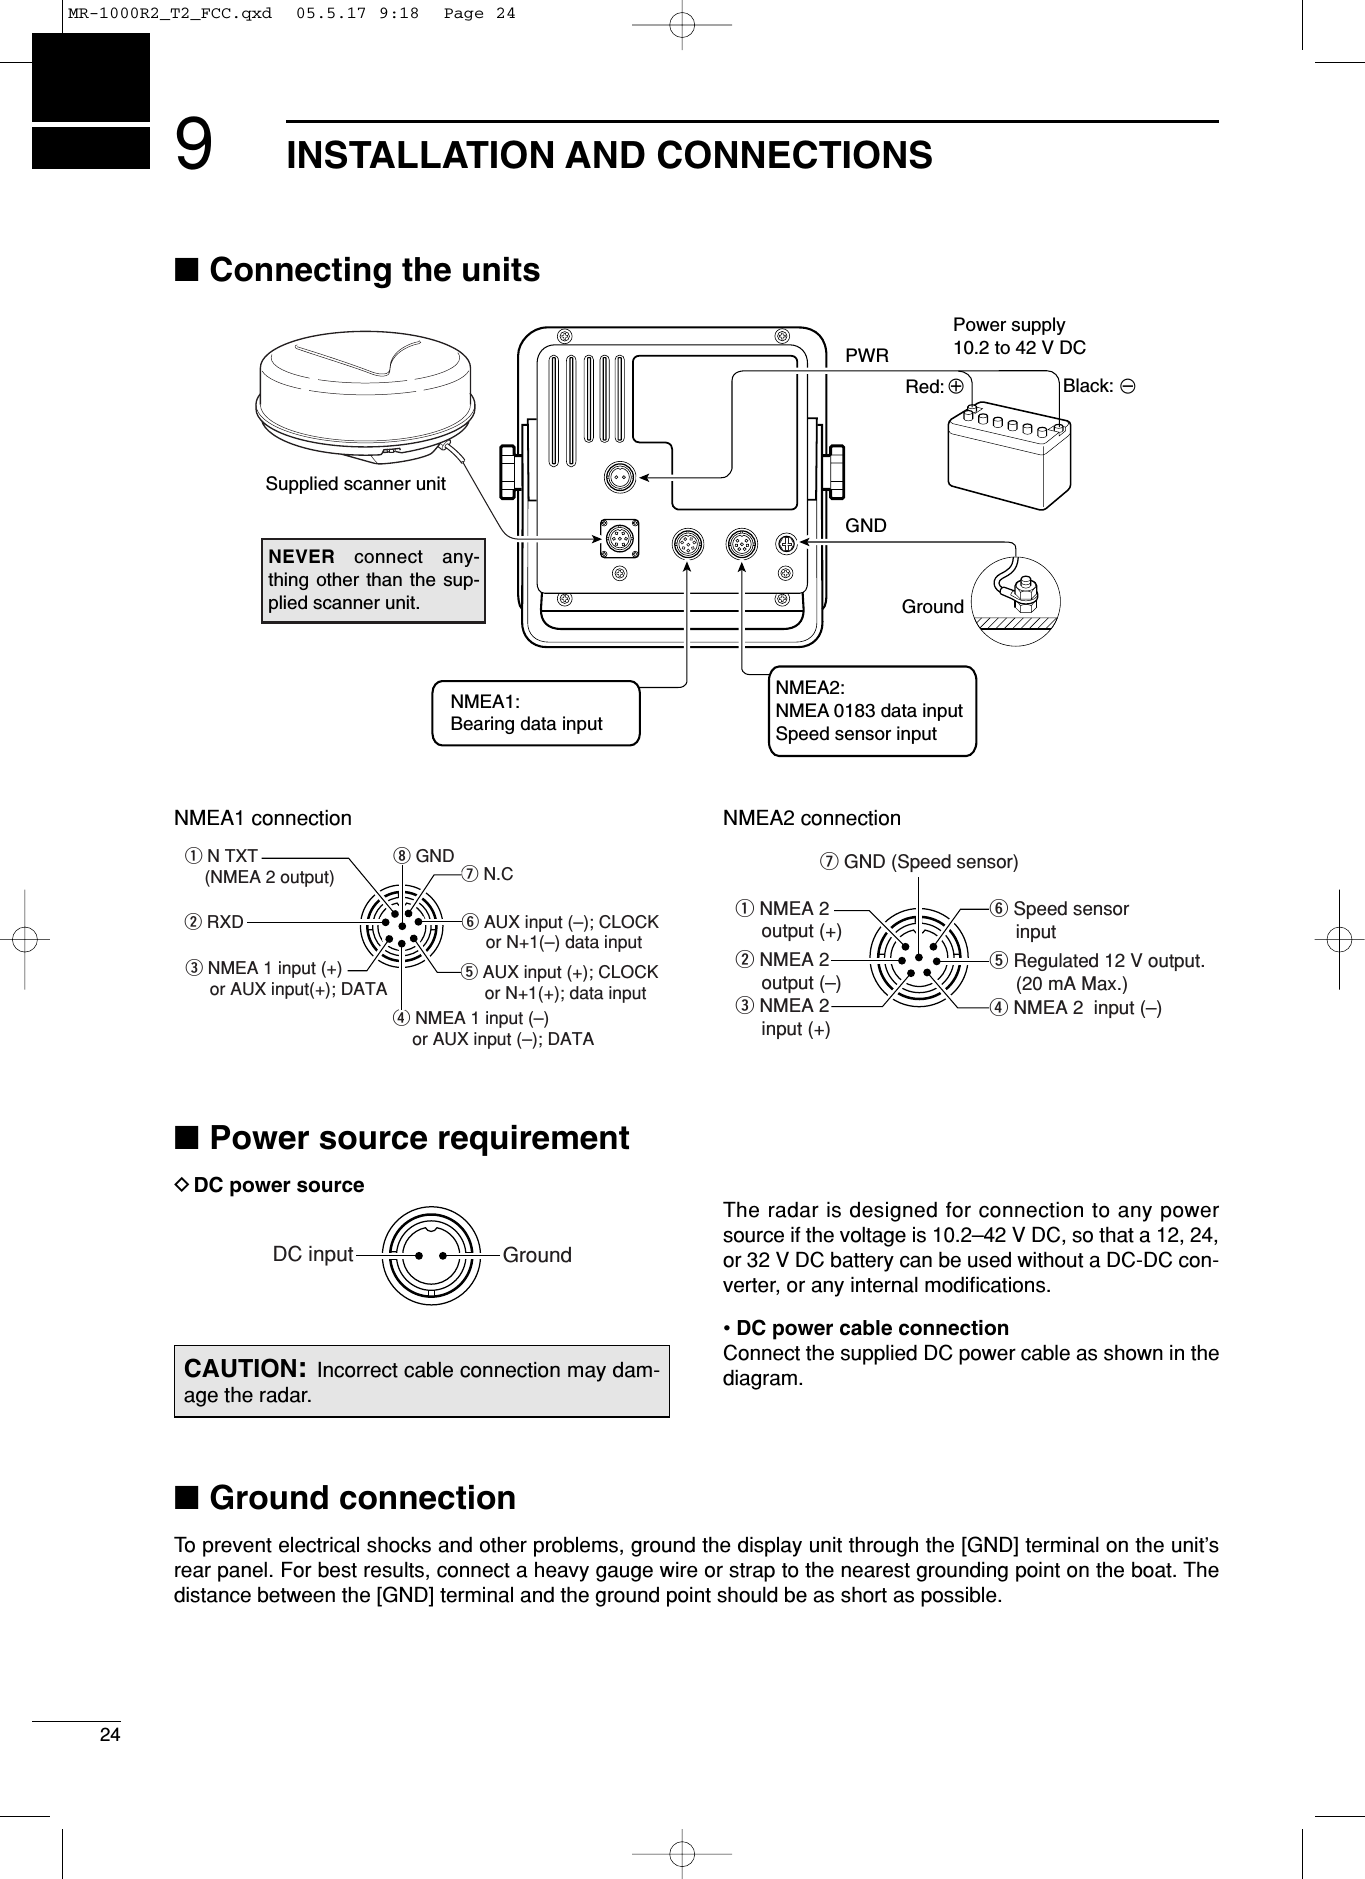 ■Connecting the unitsNMEA1 connection NMEA2 connection■Power source requirementDDC power sourceThe radar is designed for connection to any powersource if the voltage is 10.2–42 V DC, so that a 12, 24,or 32 V DC battery can be used without a DC-DC con-verter, or any internal modiﬁcations. • DC power cable connectionConnect the supplied DC power cable as shown in thediagram.■Ground connectionTo prevent electrical shocks and other problems, ground the display unit through the [GND] terminal on the unit’srear panel. For best results, connect a heavy gauge wire or strap to the nearest grounding point on the boat. Thedistance between the [GND] terminal and the ground point should be as short as possible.CAUTION:Incorrect cable connection may dam-age the radar.DC input Groundq N TXT    (NMEA 2 output)w RXDi GND u N.Cy AUX input (–); CLOCK     or N+1(–) data inputt AUX input (+); CLOCK     or N+1(+); data inputr NMEA 1 input (–)    or AUX input (–); DATAe NMEA 1 input (+)     or AUX input(+); DATA NMEA1:Bearing data inputNMEA2:NMEA 0183 data inputSpeed sensor input+GroundPower supply10.2 to 42 V DCRed: Black: _PWRGNDNEVER connect any-thing other than the sup-plied scanner unit.Supplied scanner unit9INSTALLATION AND CONNECTIONS24q NMEA 2     output (+)w NMEA 2     output (–)e NMEA 2     input (+)u GND (Speed sensor)y Speed sensor     inputt Regulated 12 V output.     (20 mA Max.)r NMEA 2  input (–)MR-1000R2_T2_FCC.qxd  05.5.17 9:18  Page 24